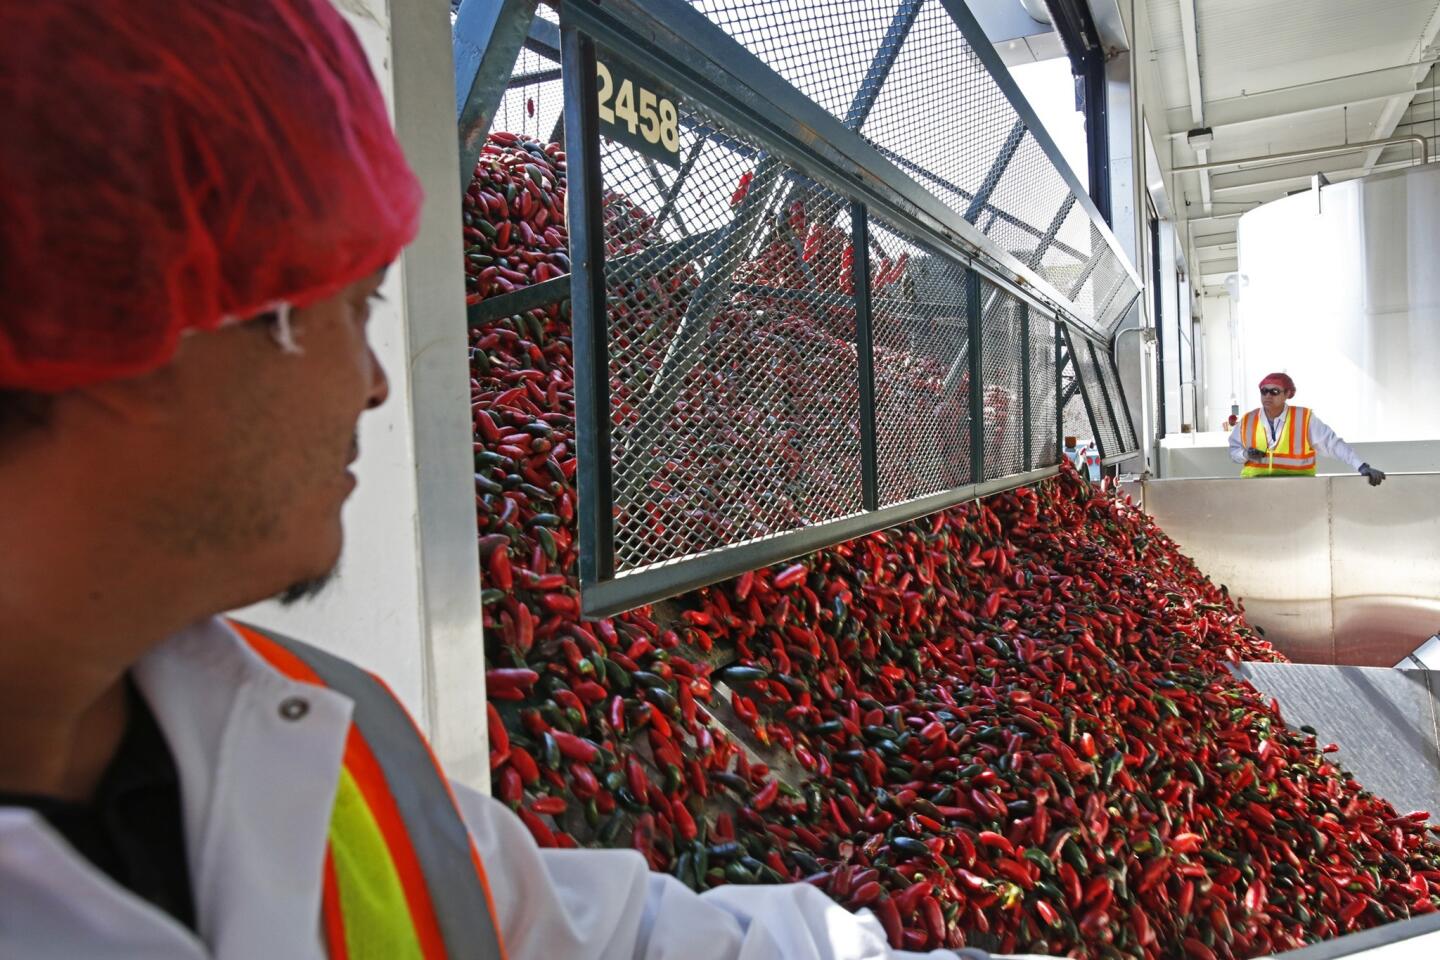 The peppers are unloaded from a truck into the factory as 300 sriracha fans tour Huy Fong Foods in Irwindale.